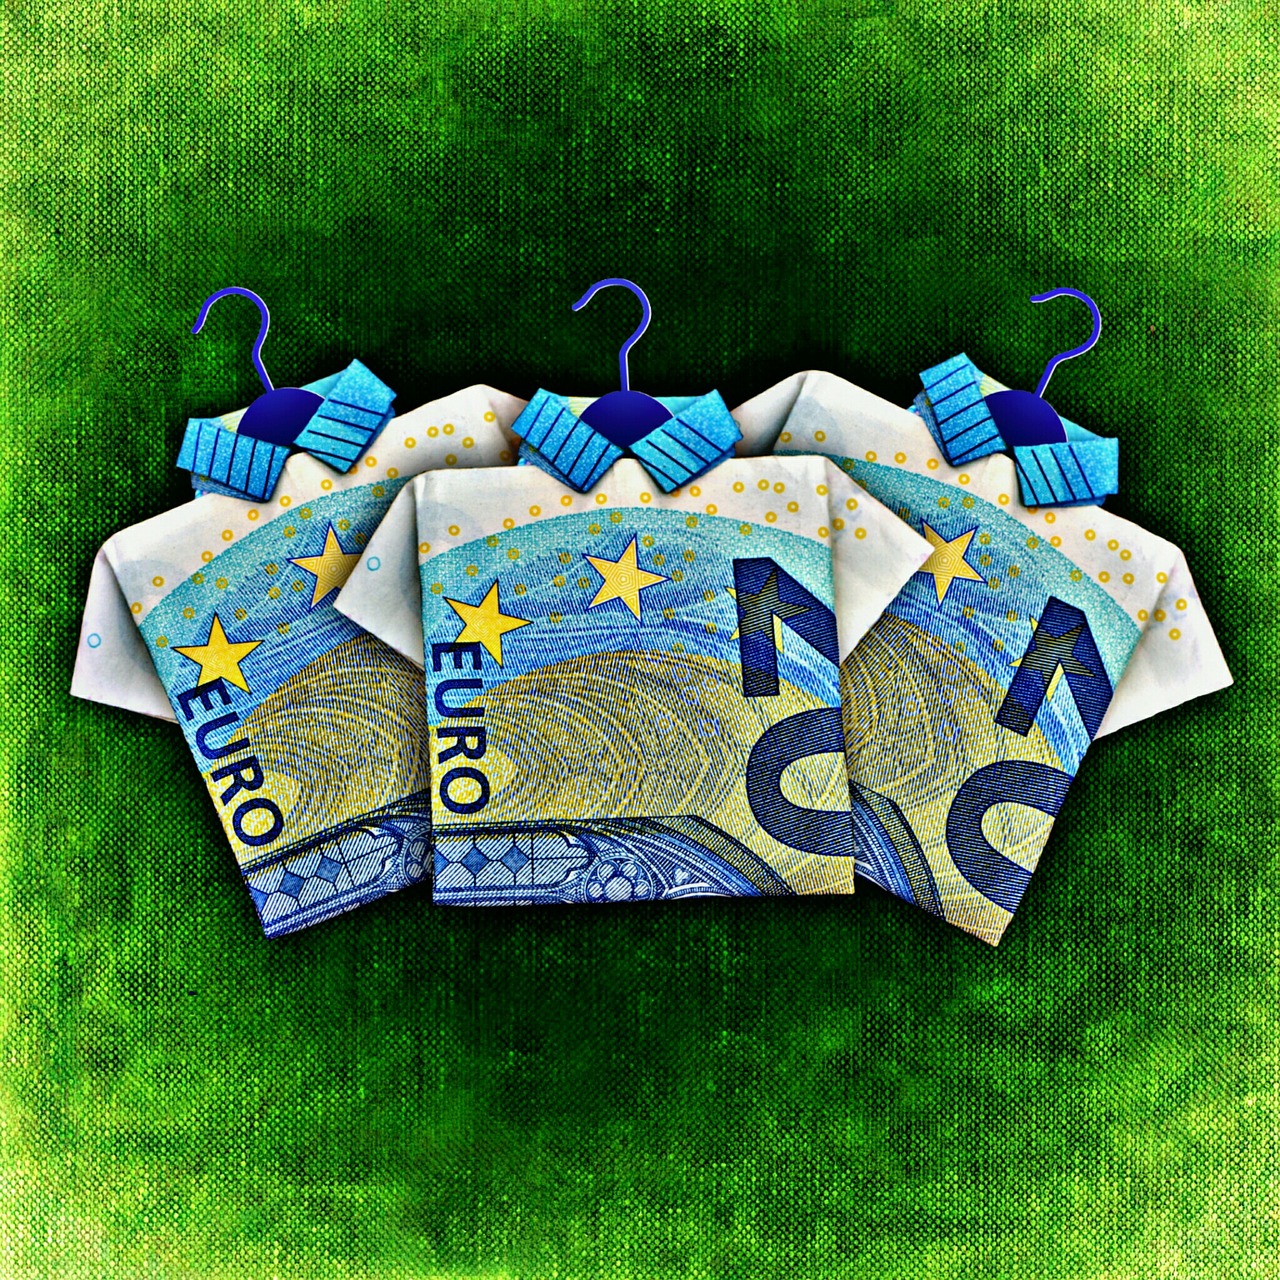 the last shirt bank note currency free photo